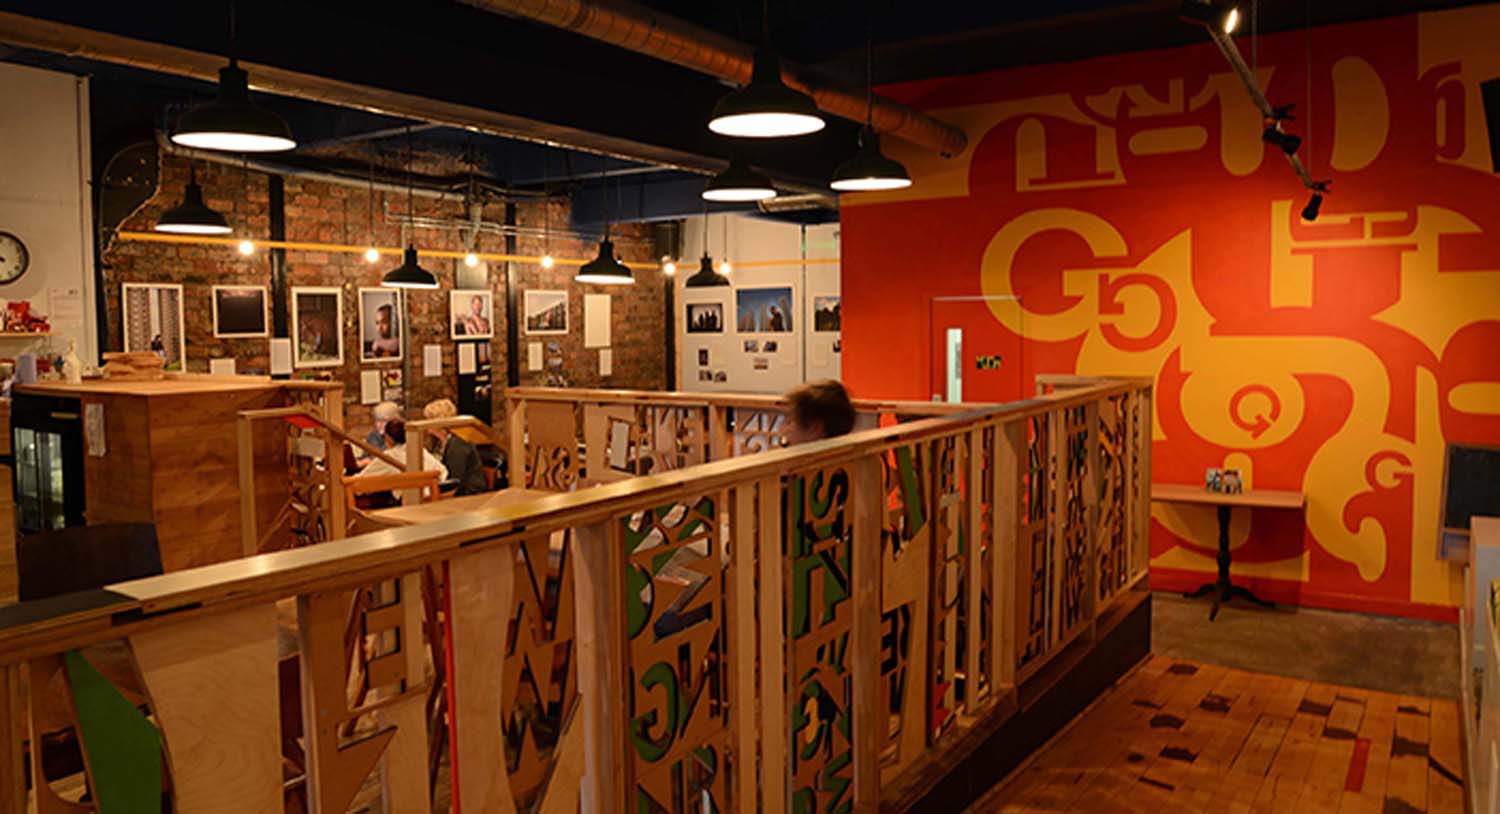 A pony wall separates a section of the Glad Cafe seating area. The pony wall is made of timber and has cut out letter stencils.